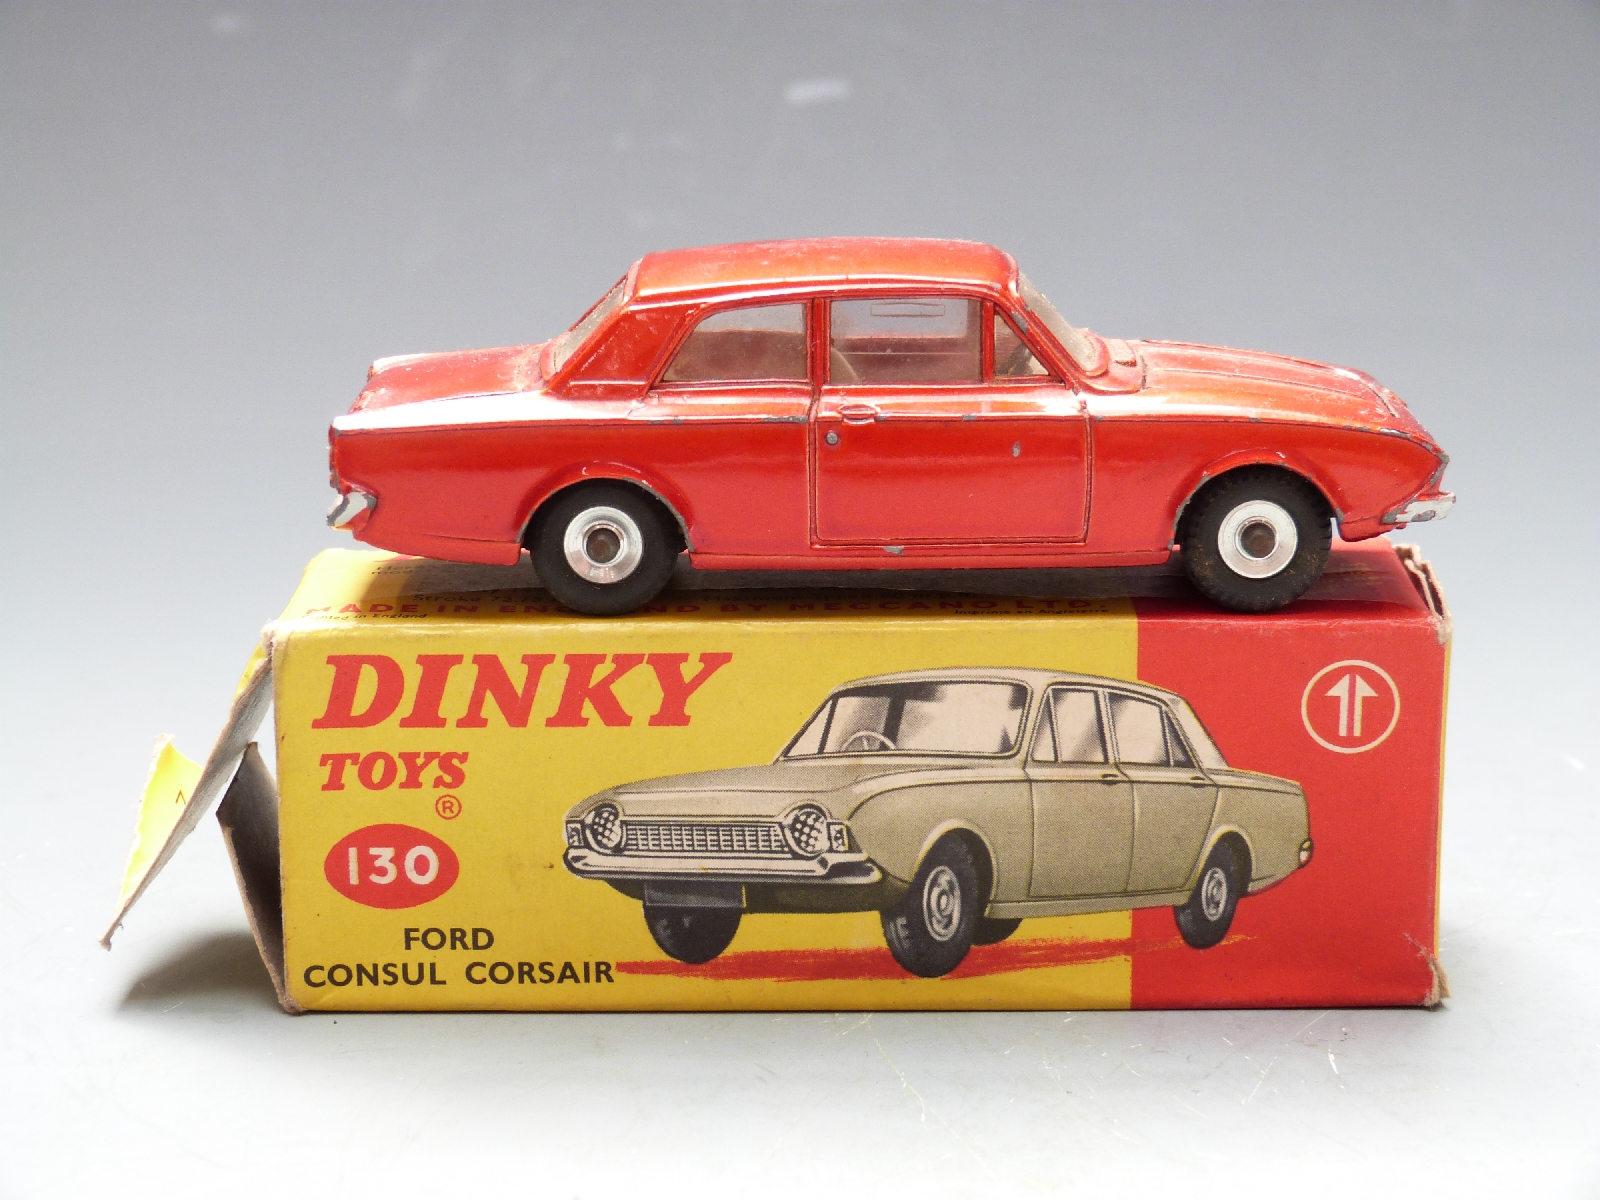 Dinky Toys diecast model Ford Consul Corsair with metallic red body and ...